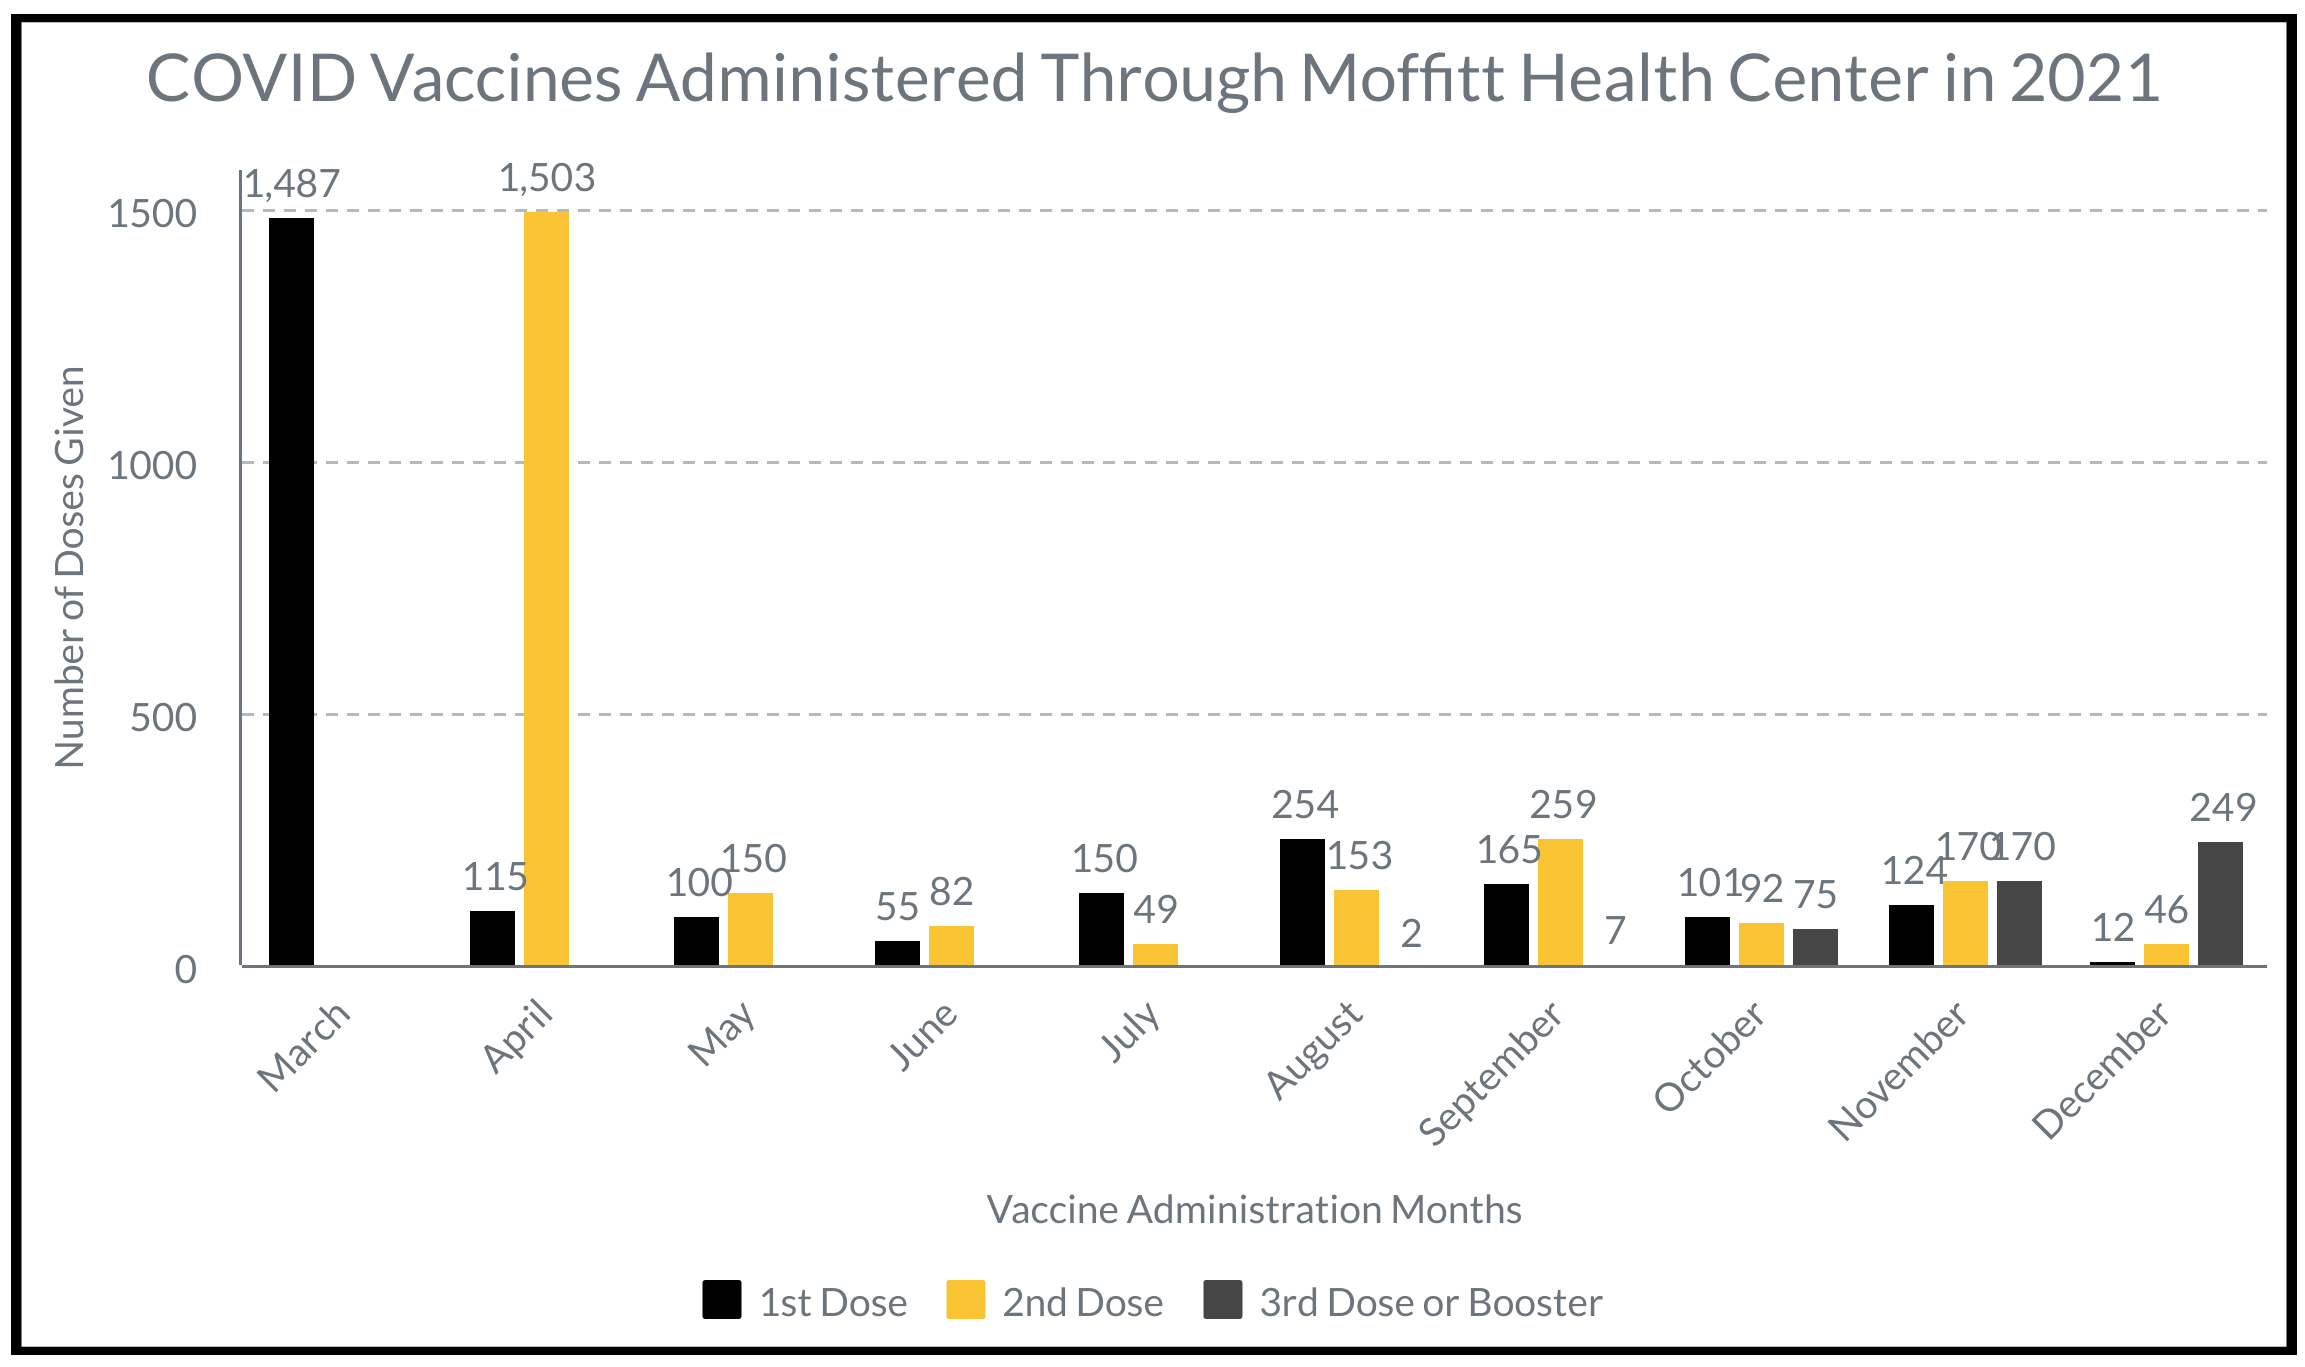 COVID Vaccines Administered Through Moffitt Health Center in 2021